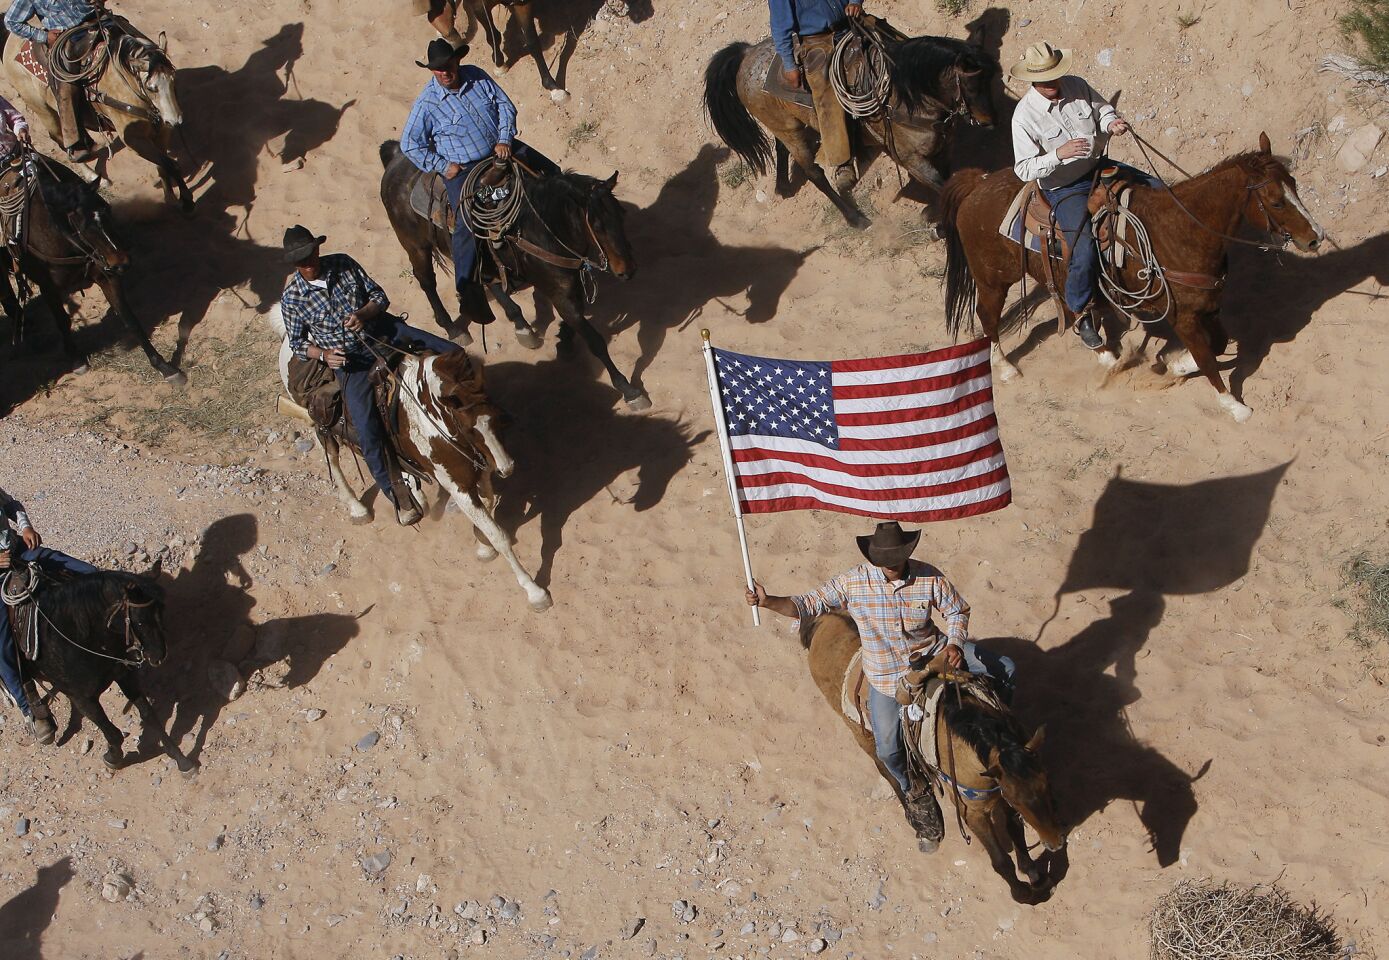 The Bundy family and their supporters fly the American flag as their cattle is released by the Bureau of Land Management back onto public land outside of Bunkerville, Nev.